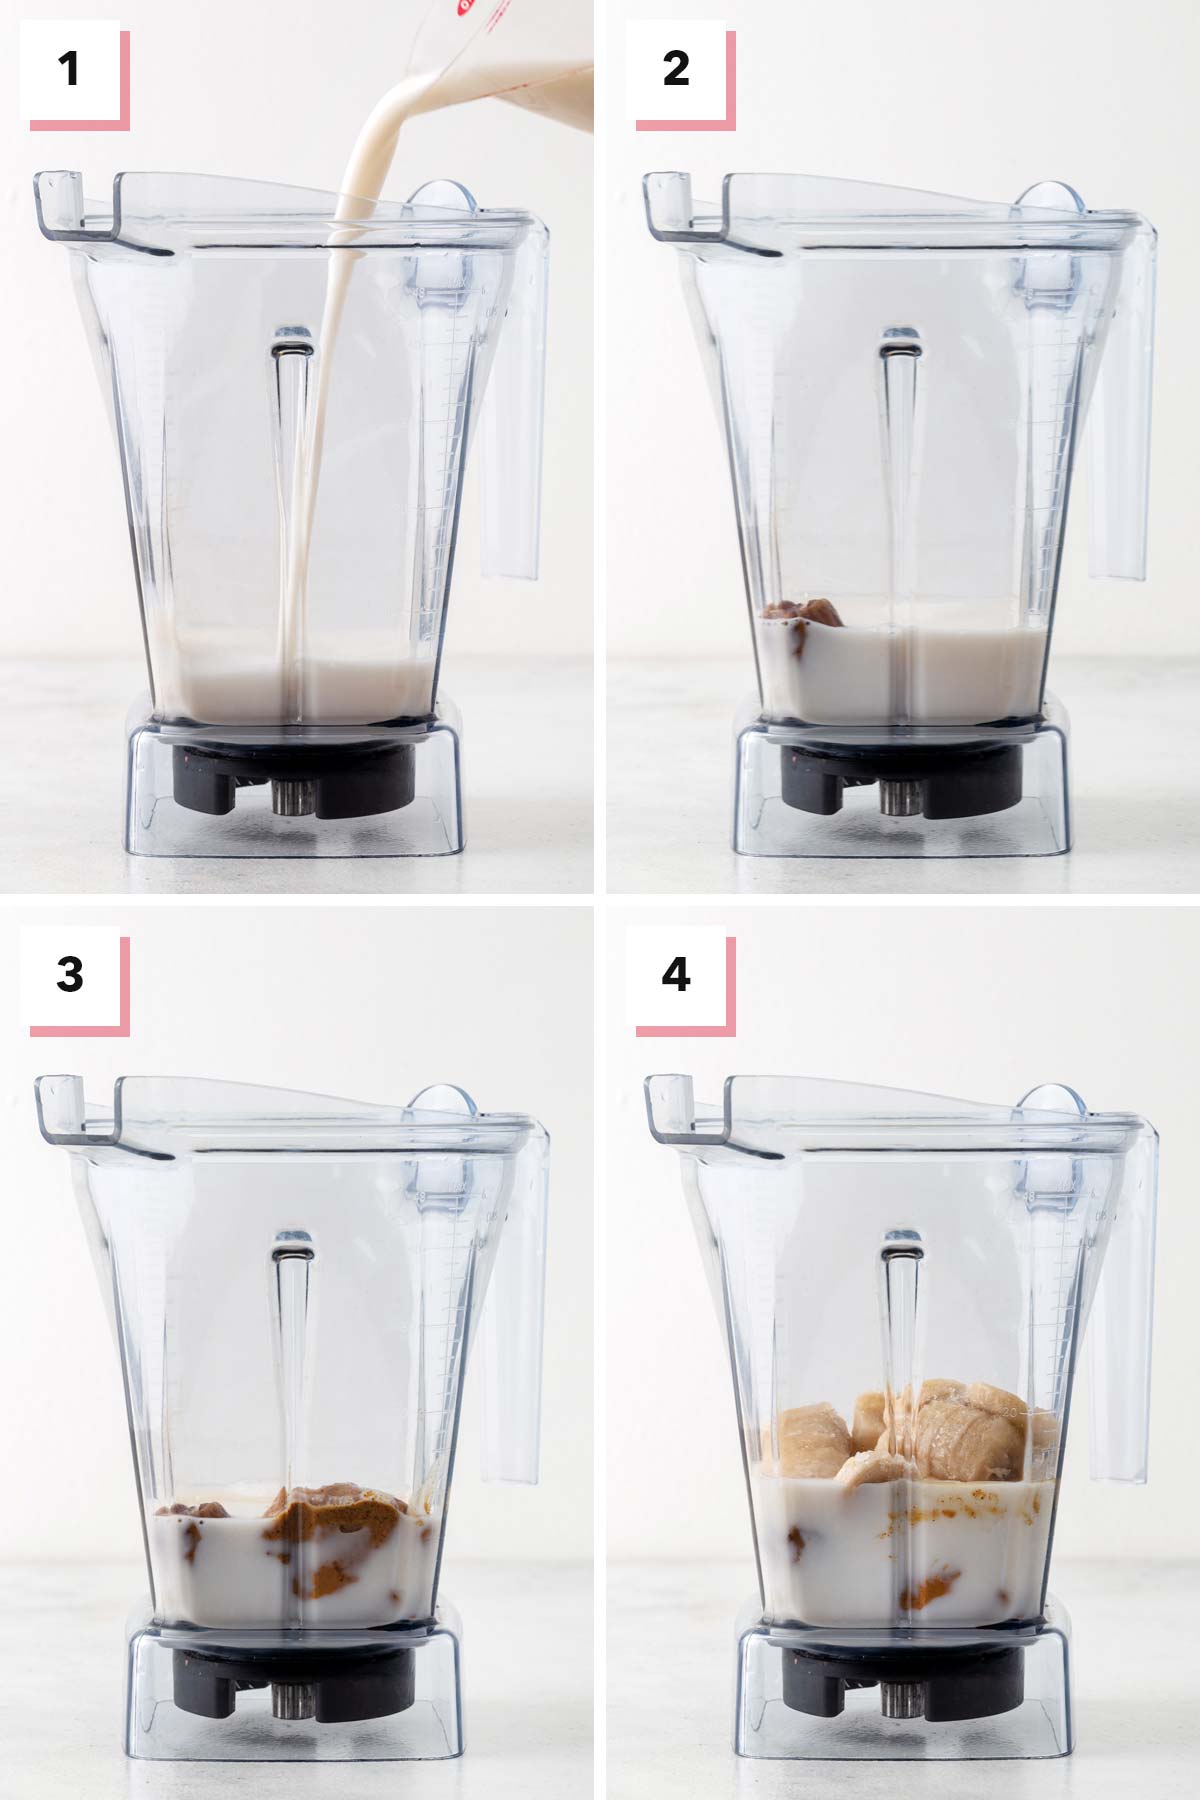 Steps for making an almond milk smoothie.